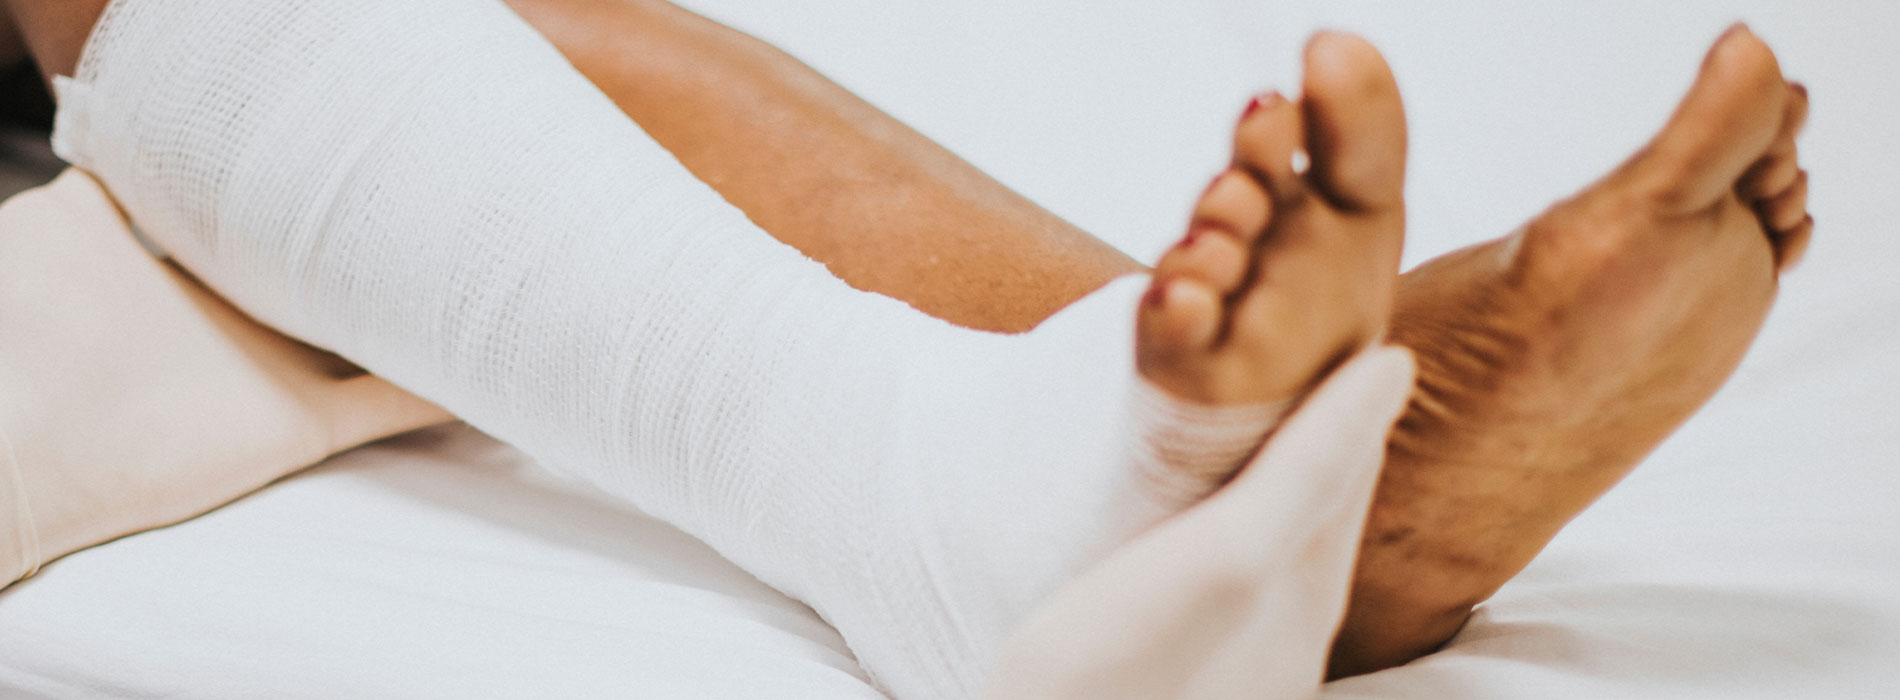 Premiere Pointe Podiatry | Heel Pain, Fungal Nails and Ingrown Nails